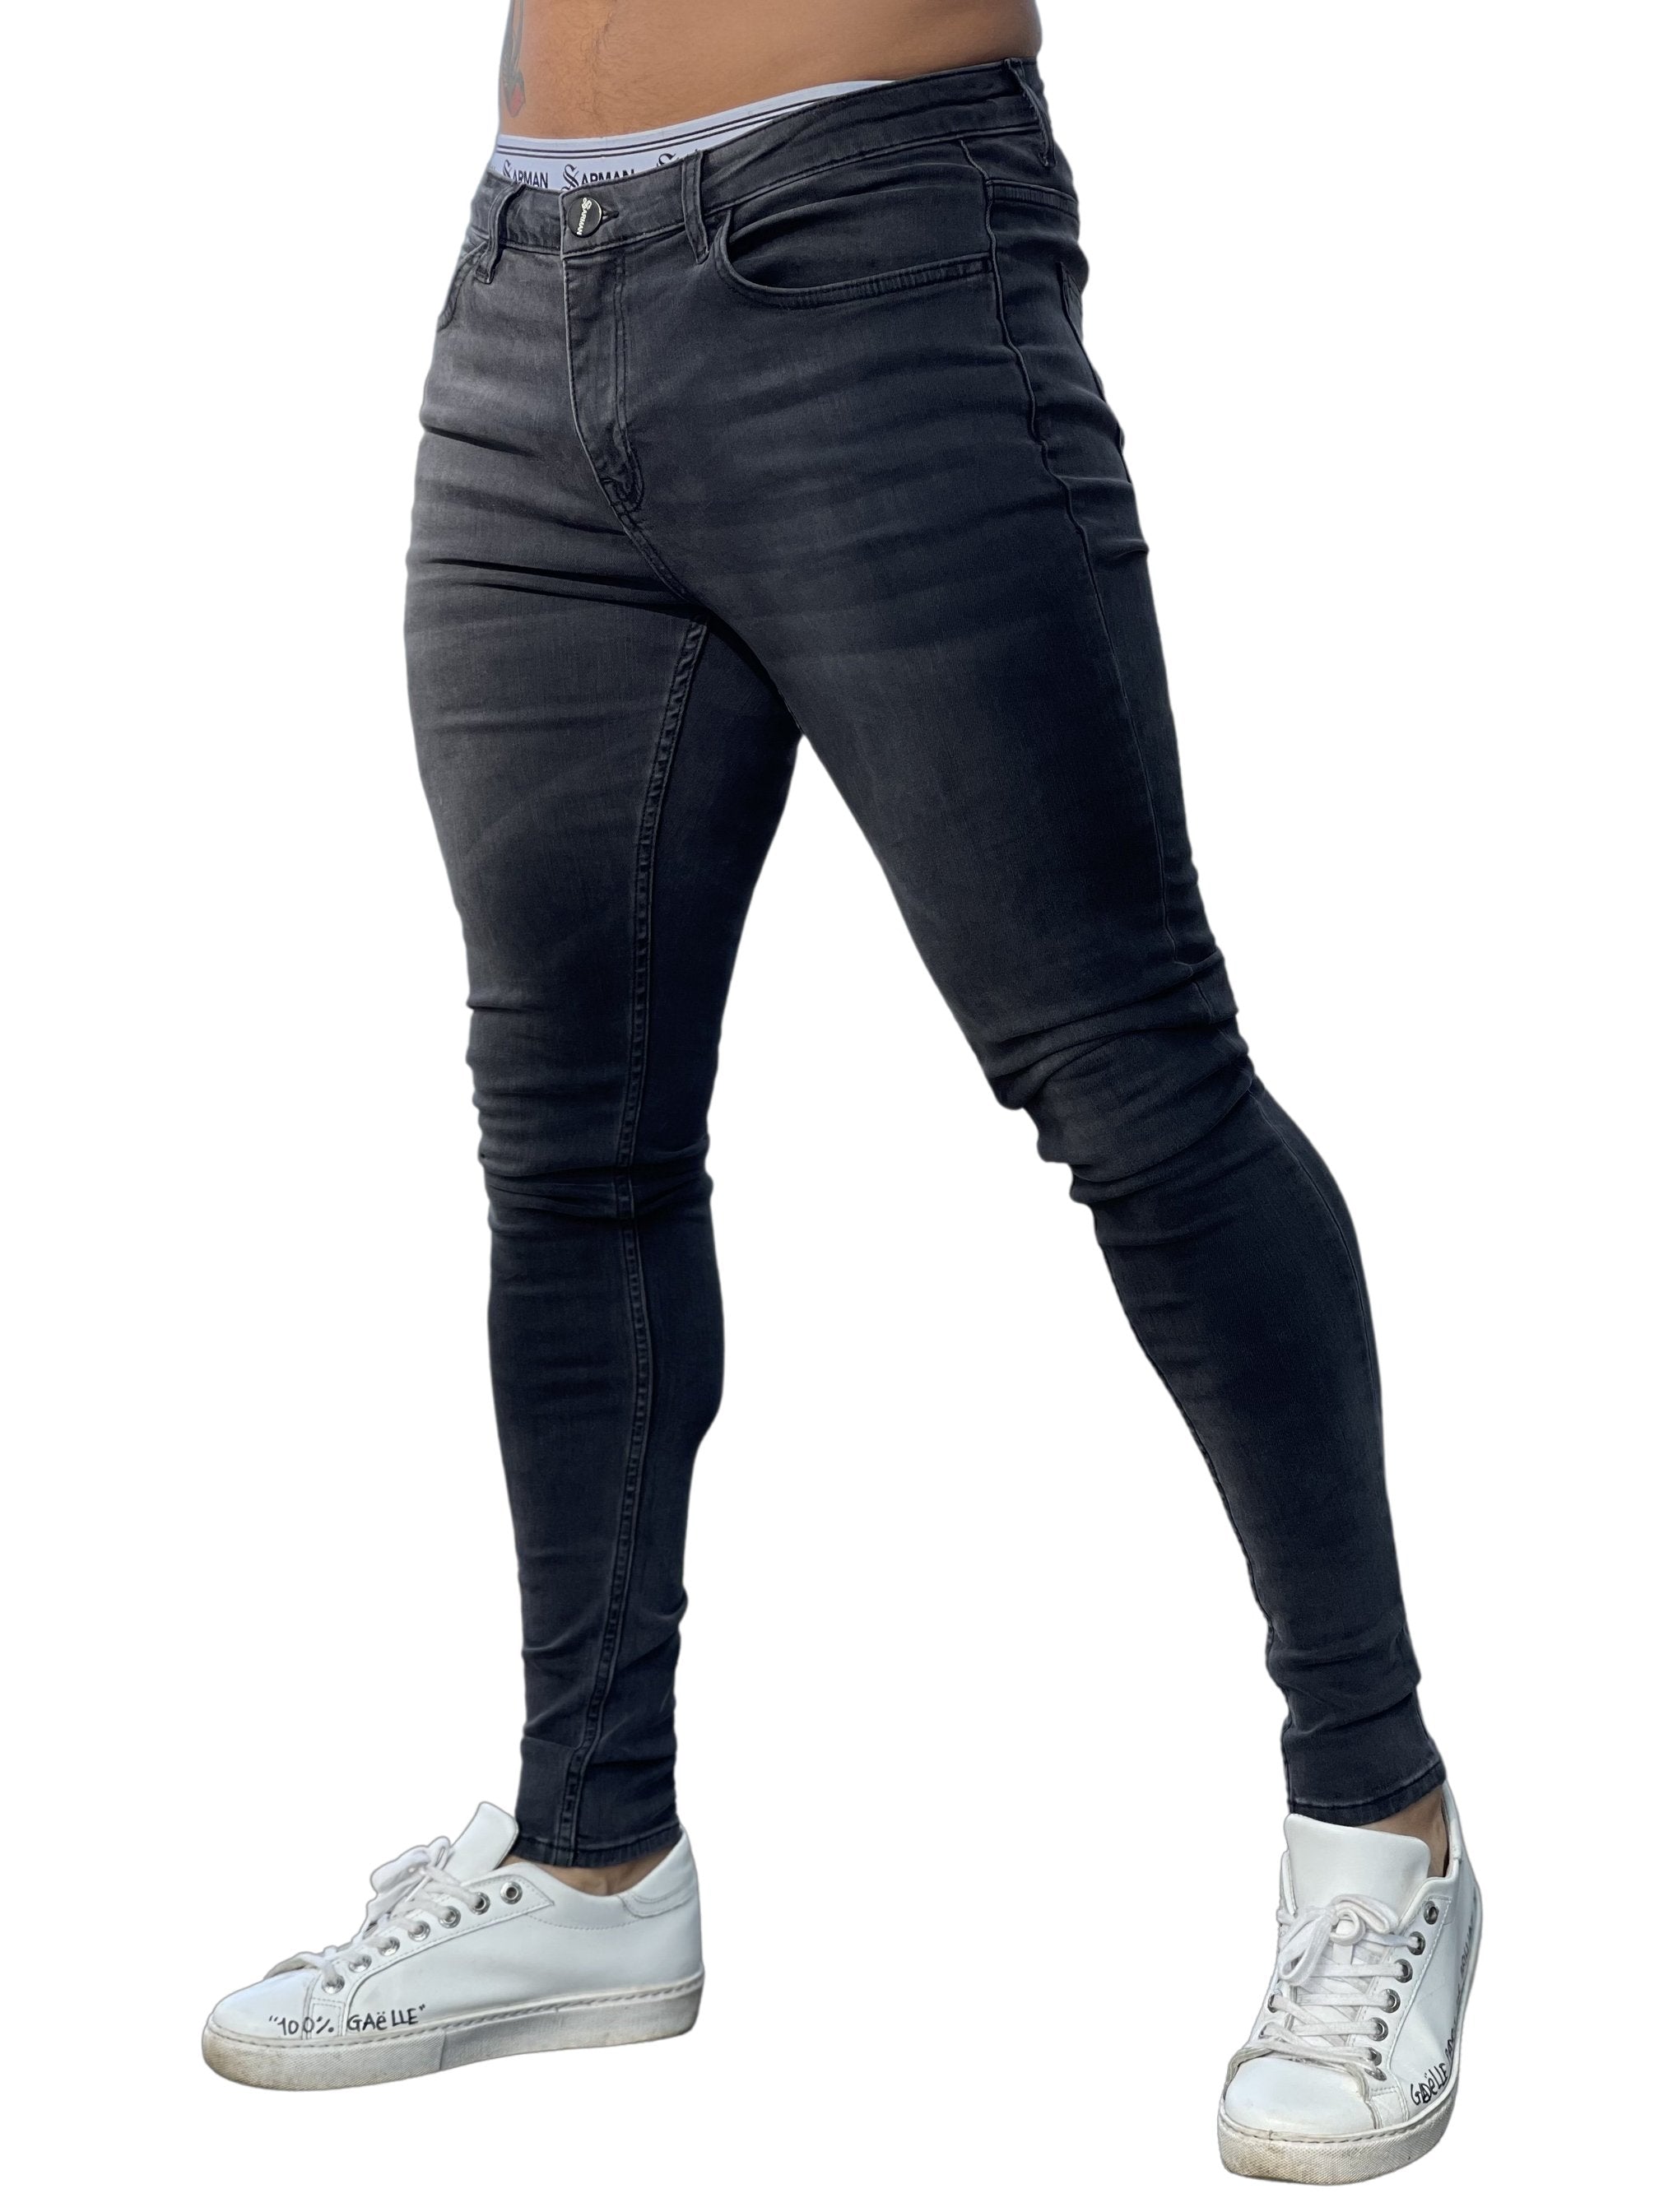 Survival - Skinny Jeans for Men – Sarman Fashion - Clothing Fashion Brand for Men from